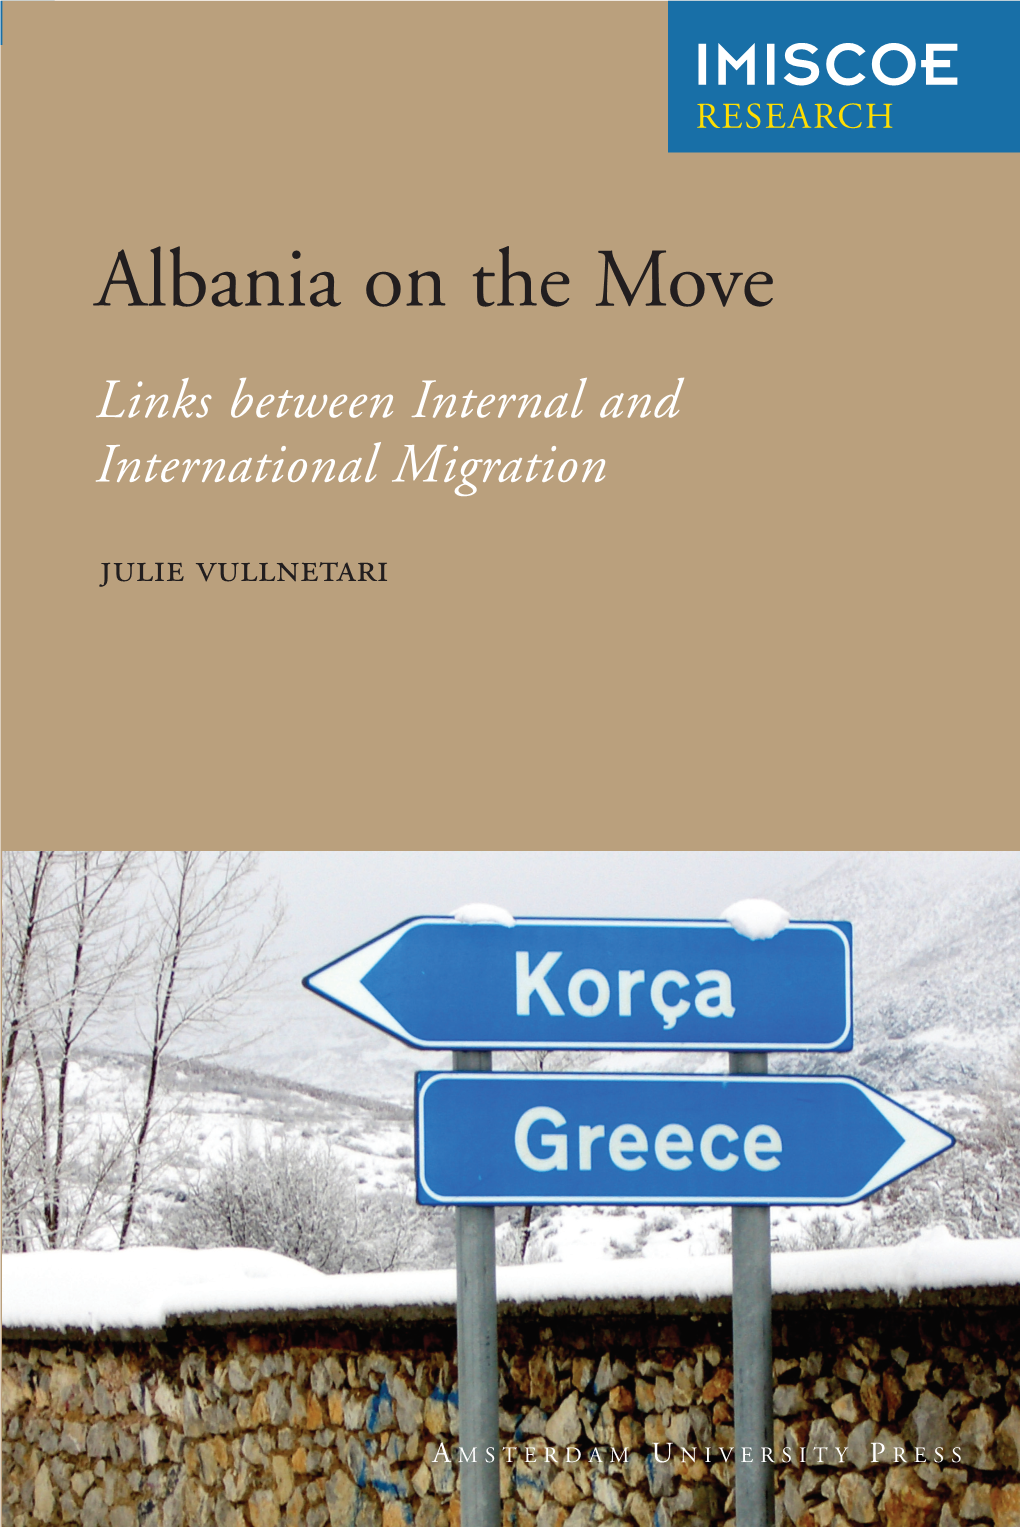 Albania on the Move Empirical Material Is Analysed with Reference to an Extensive Body of Literature